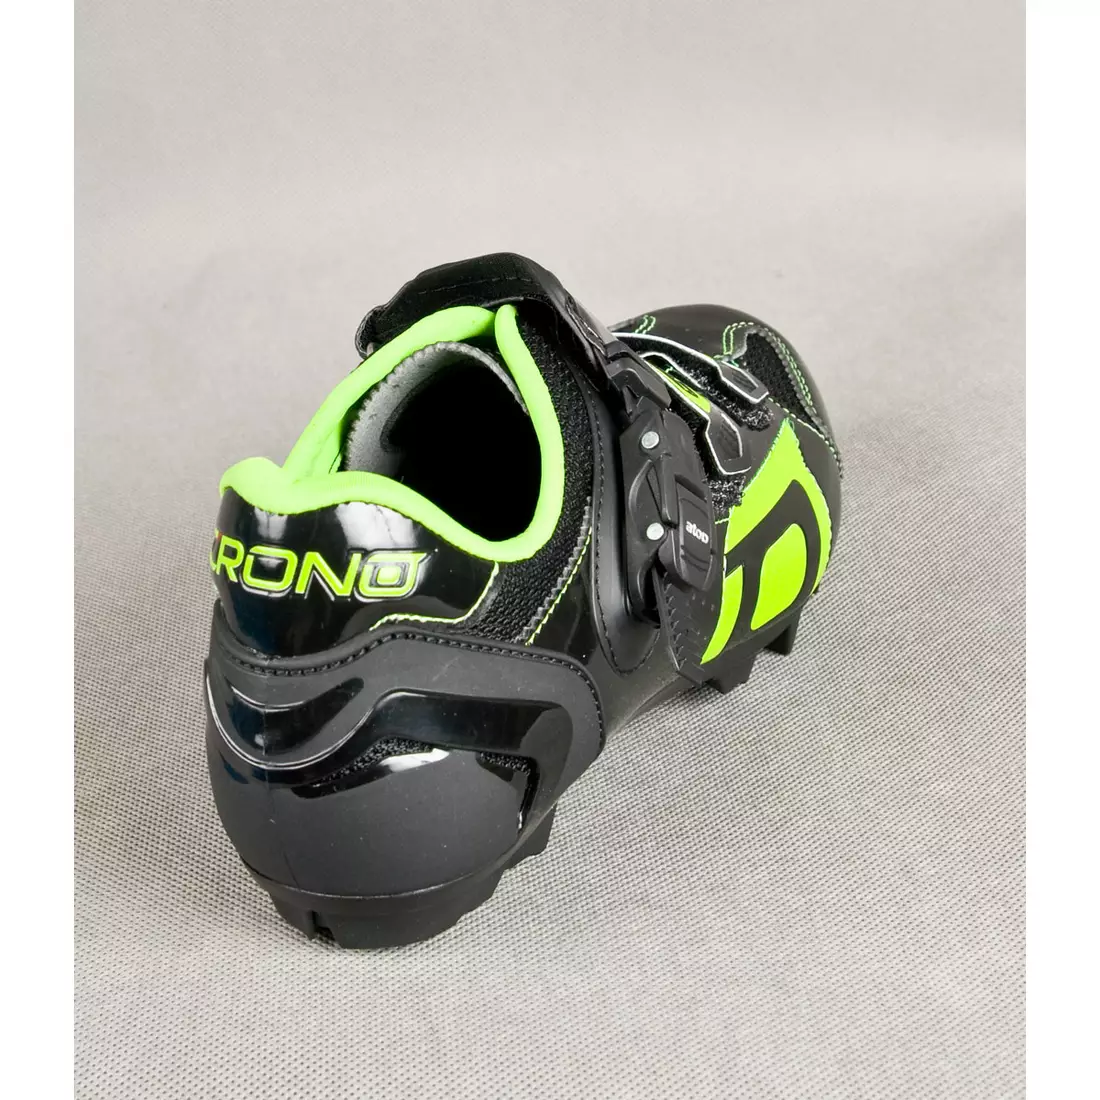 CRONO TRACK - MTB cycling shoes - color: Black and green